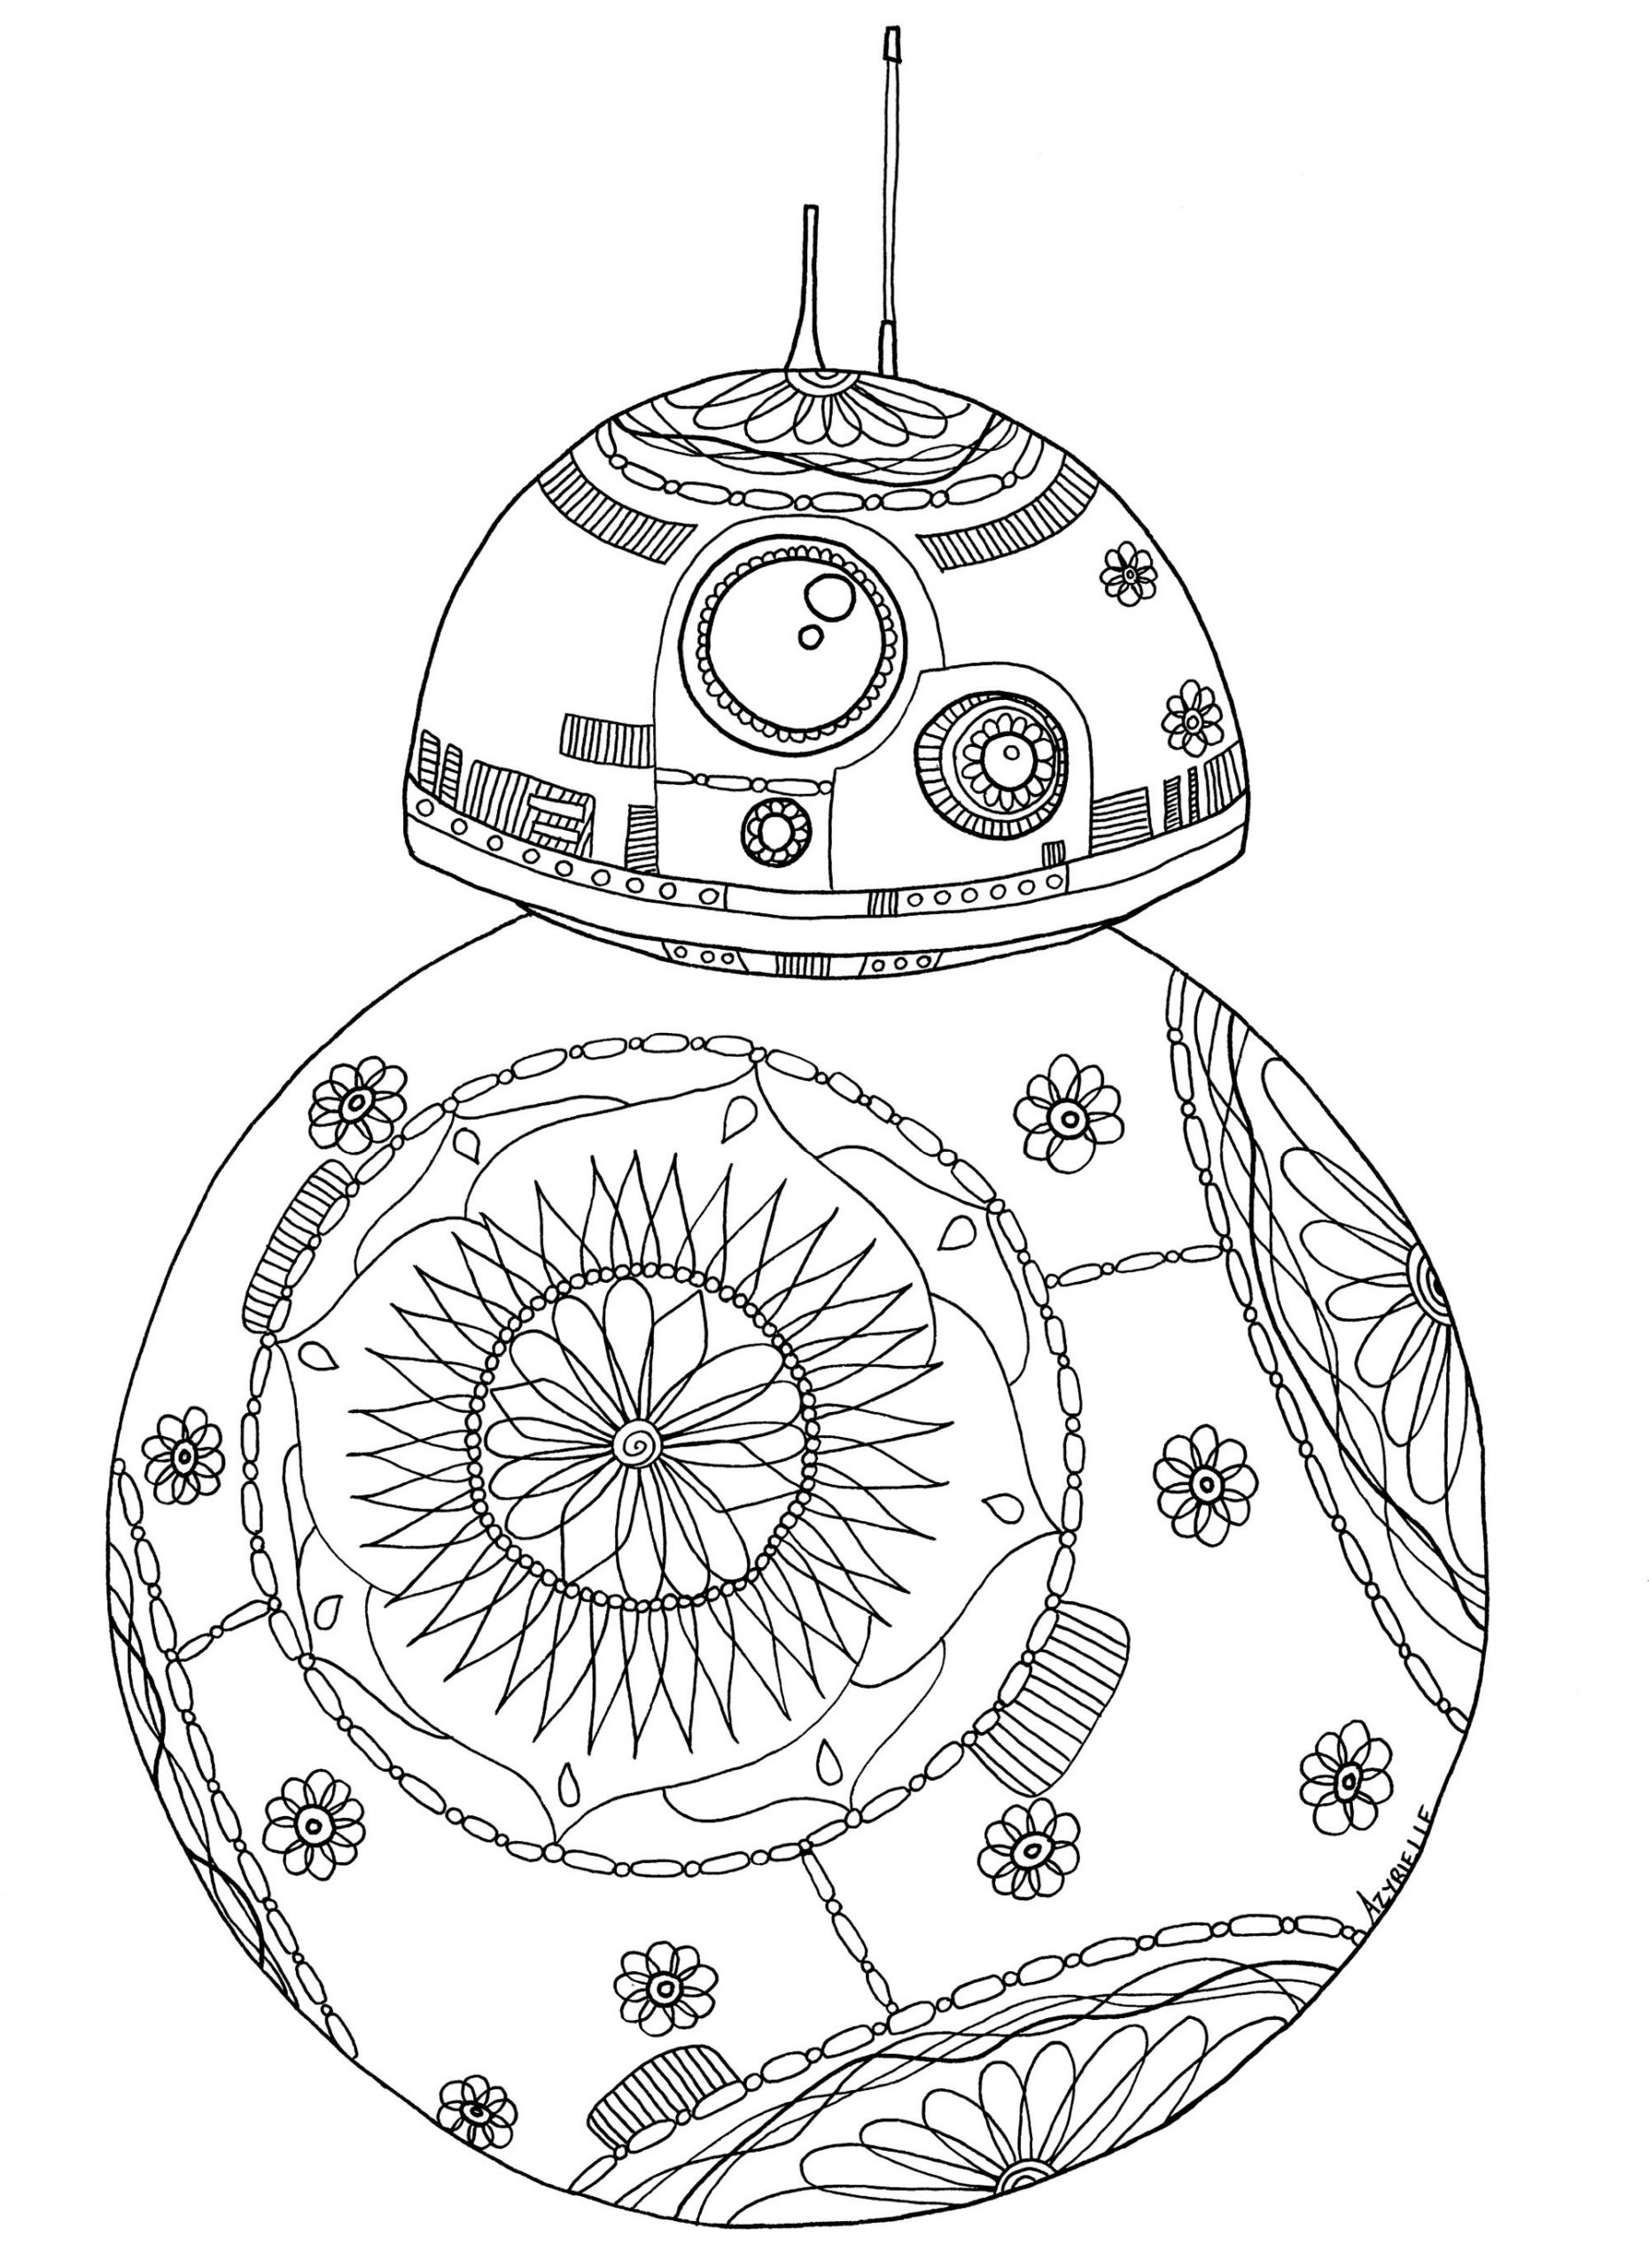 Adult Star Wars Coloring Book
 Star wars Coloring Pages for Adults